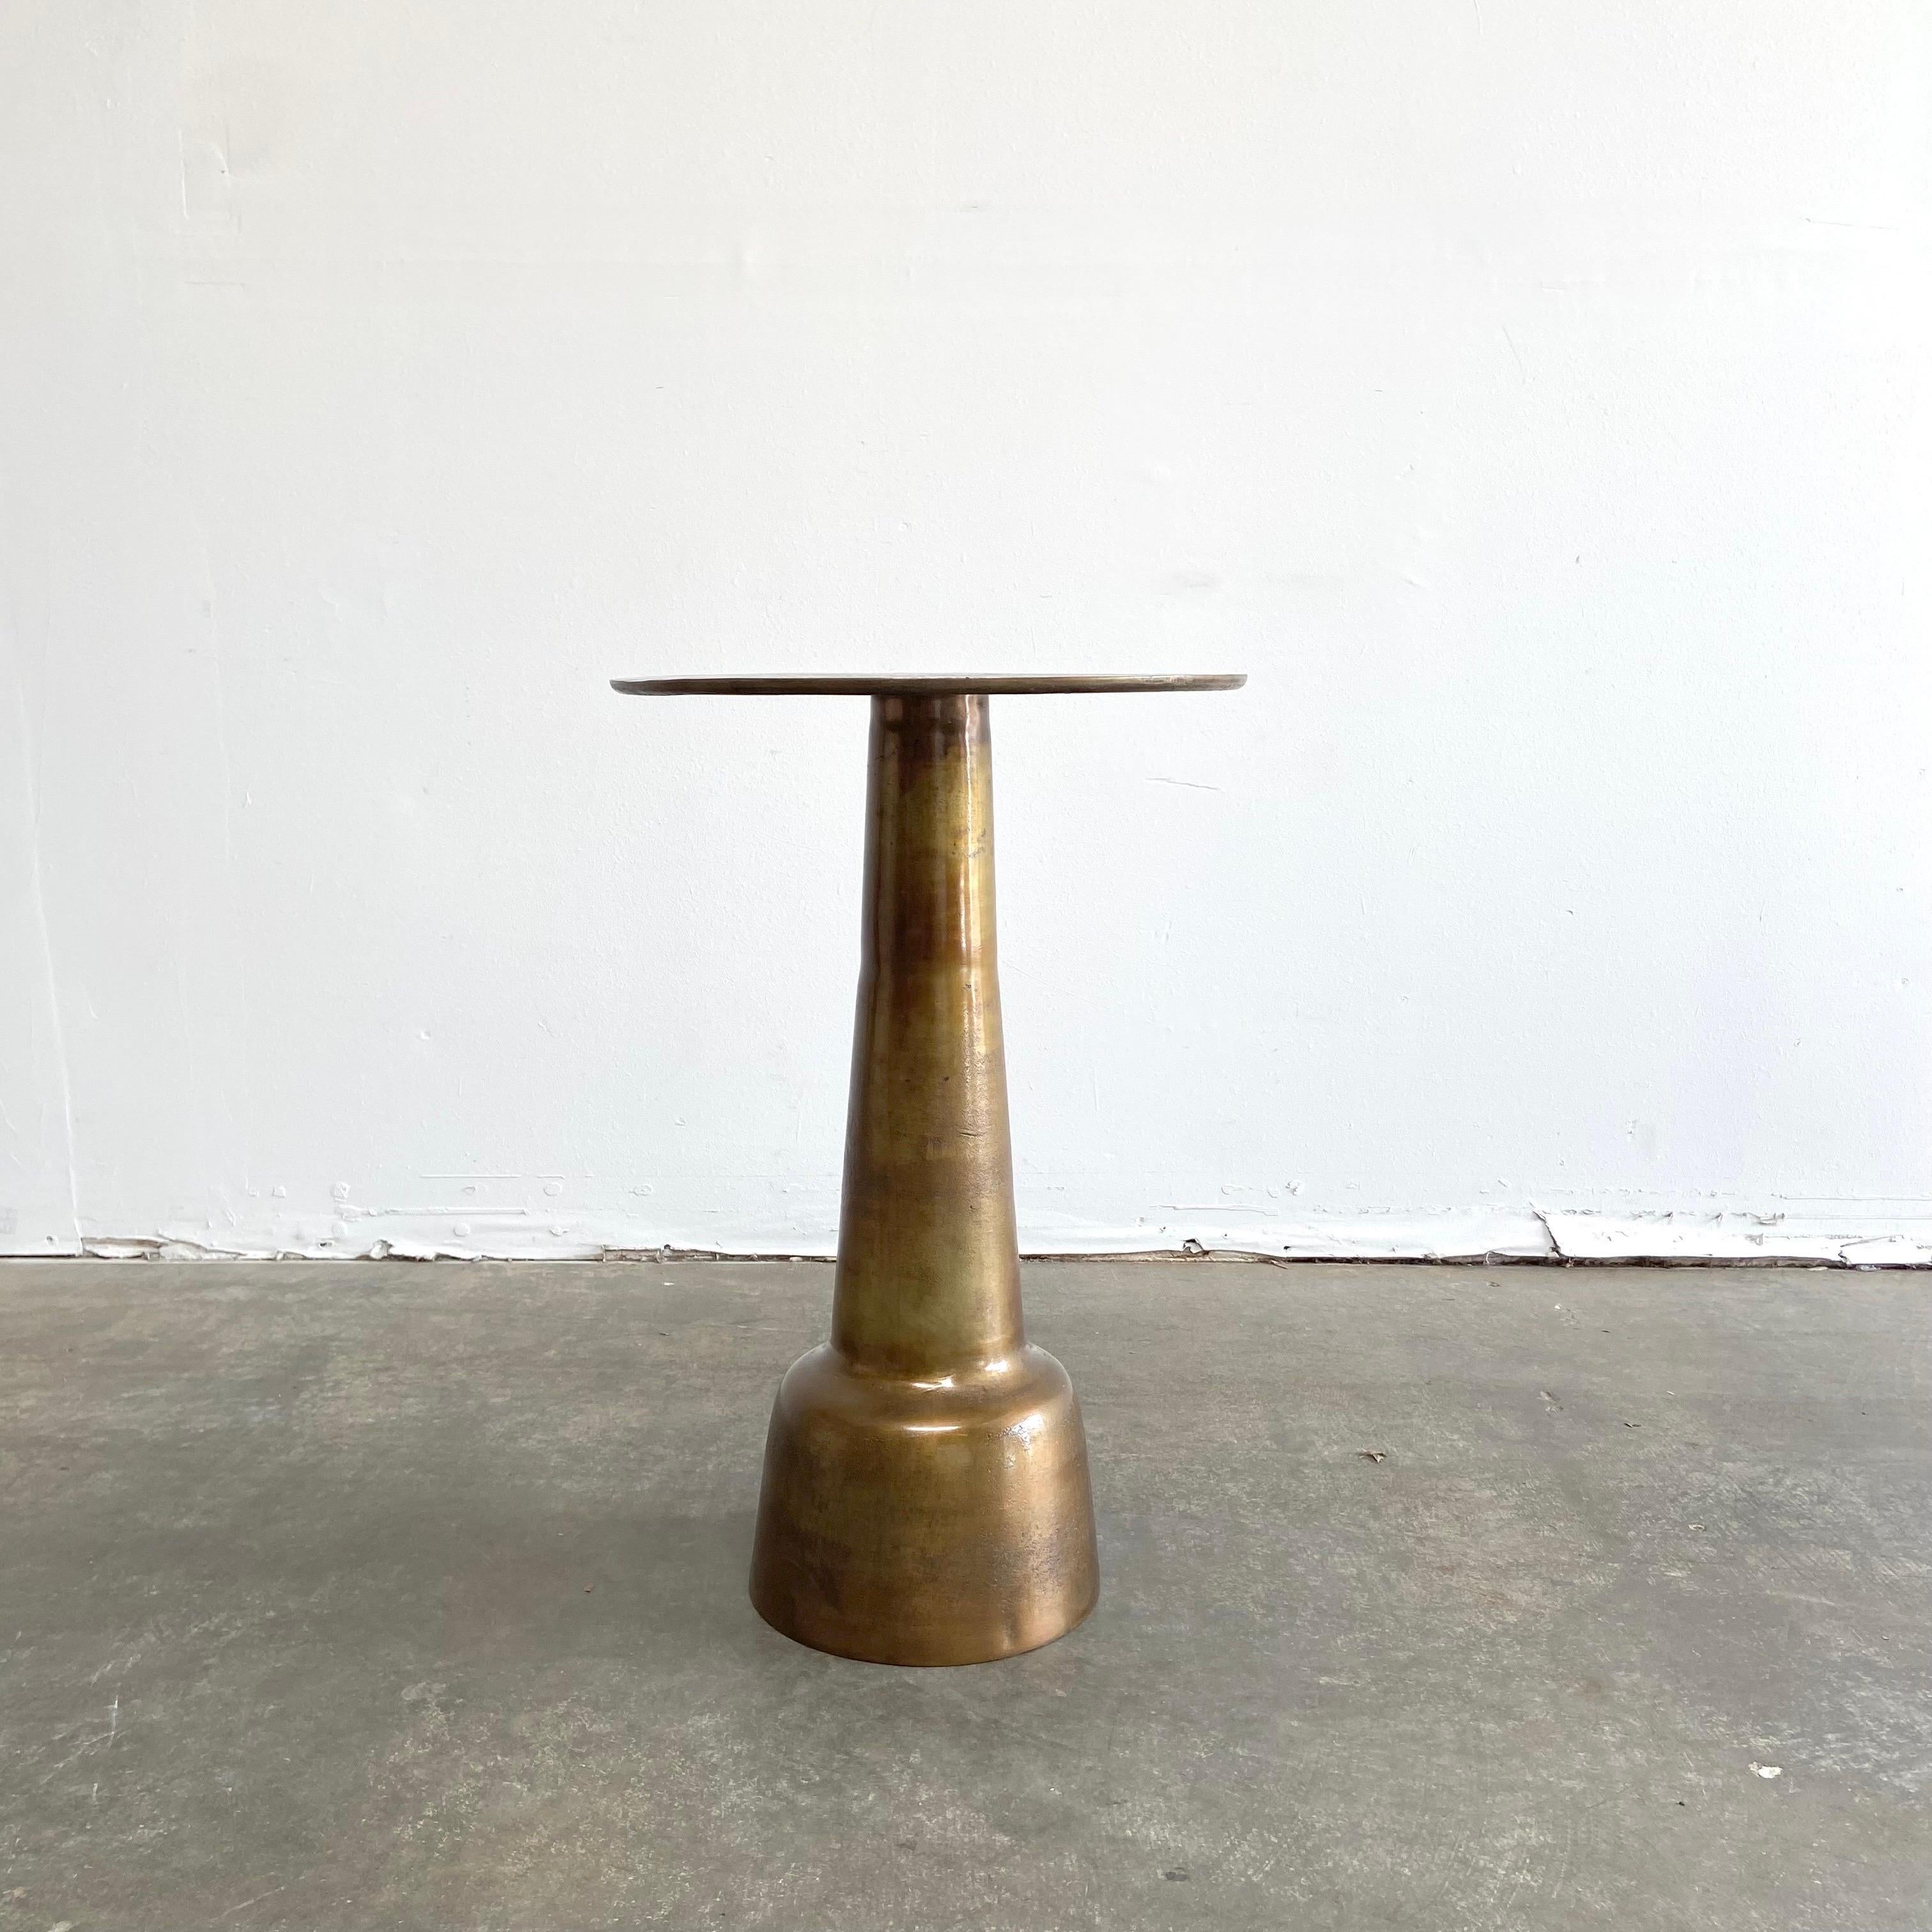 Antique brass finish side table.
Vintage modern style with beautiful patina. Perfect as a side table, or accent table in any room. Does have some weight to it, it is very sturdy.
Size: 19”RD. X 28-1/2”H.